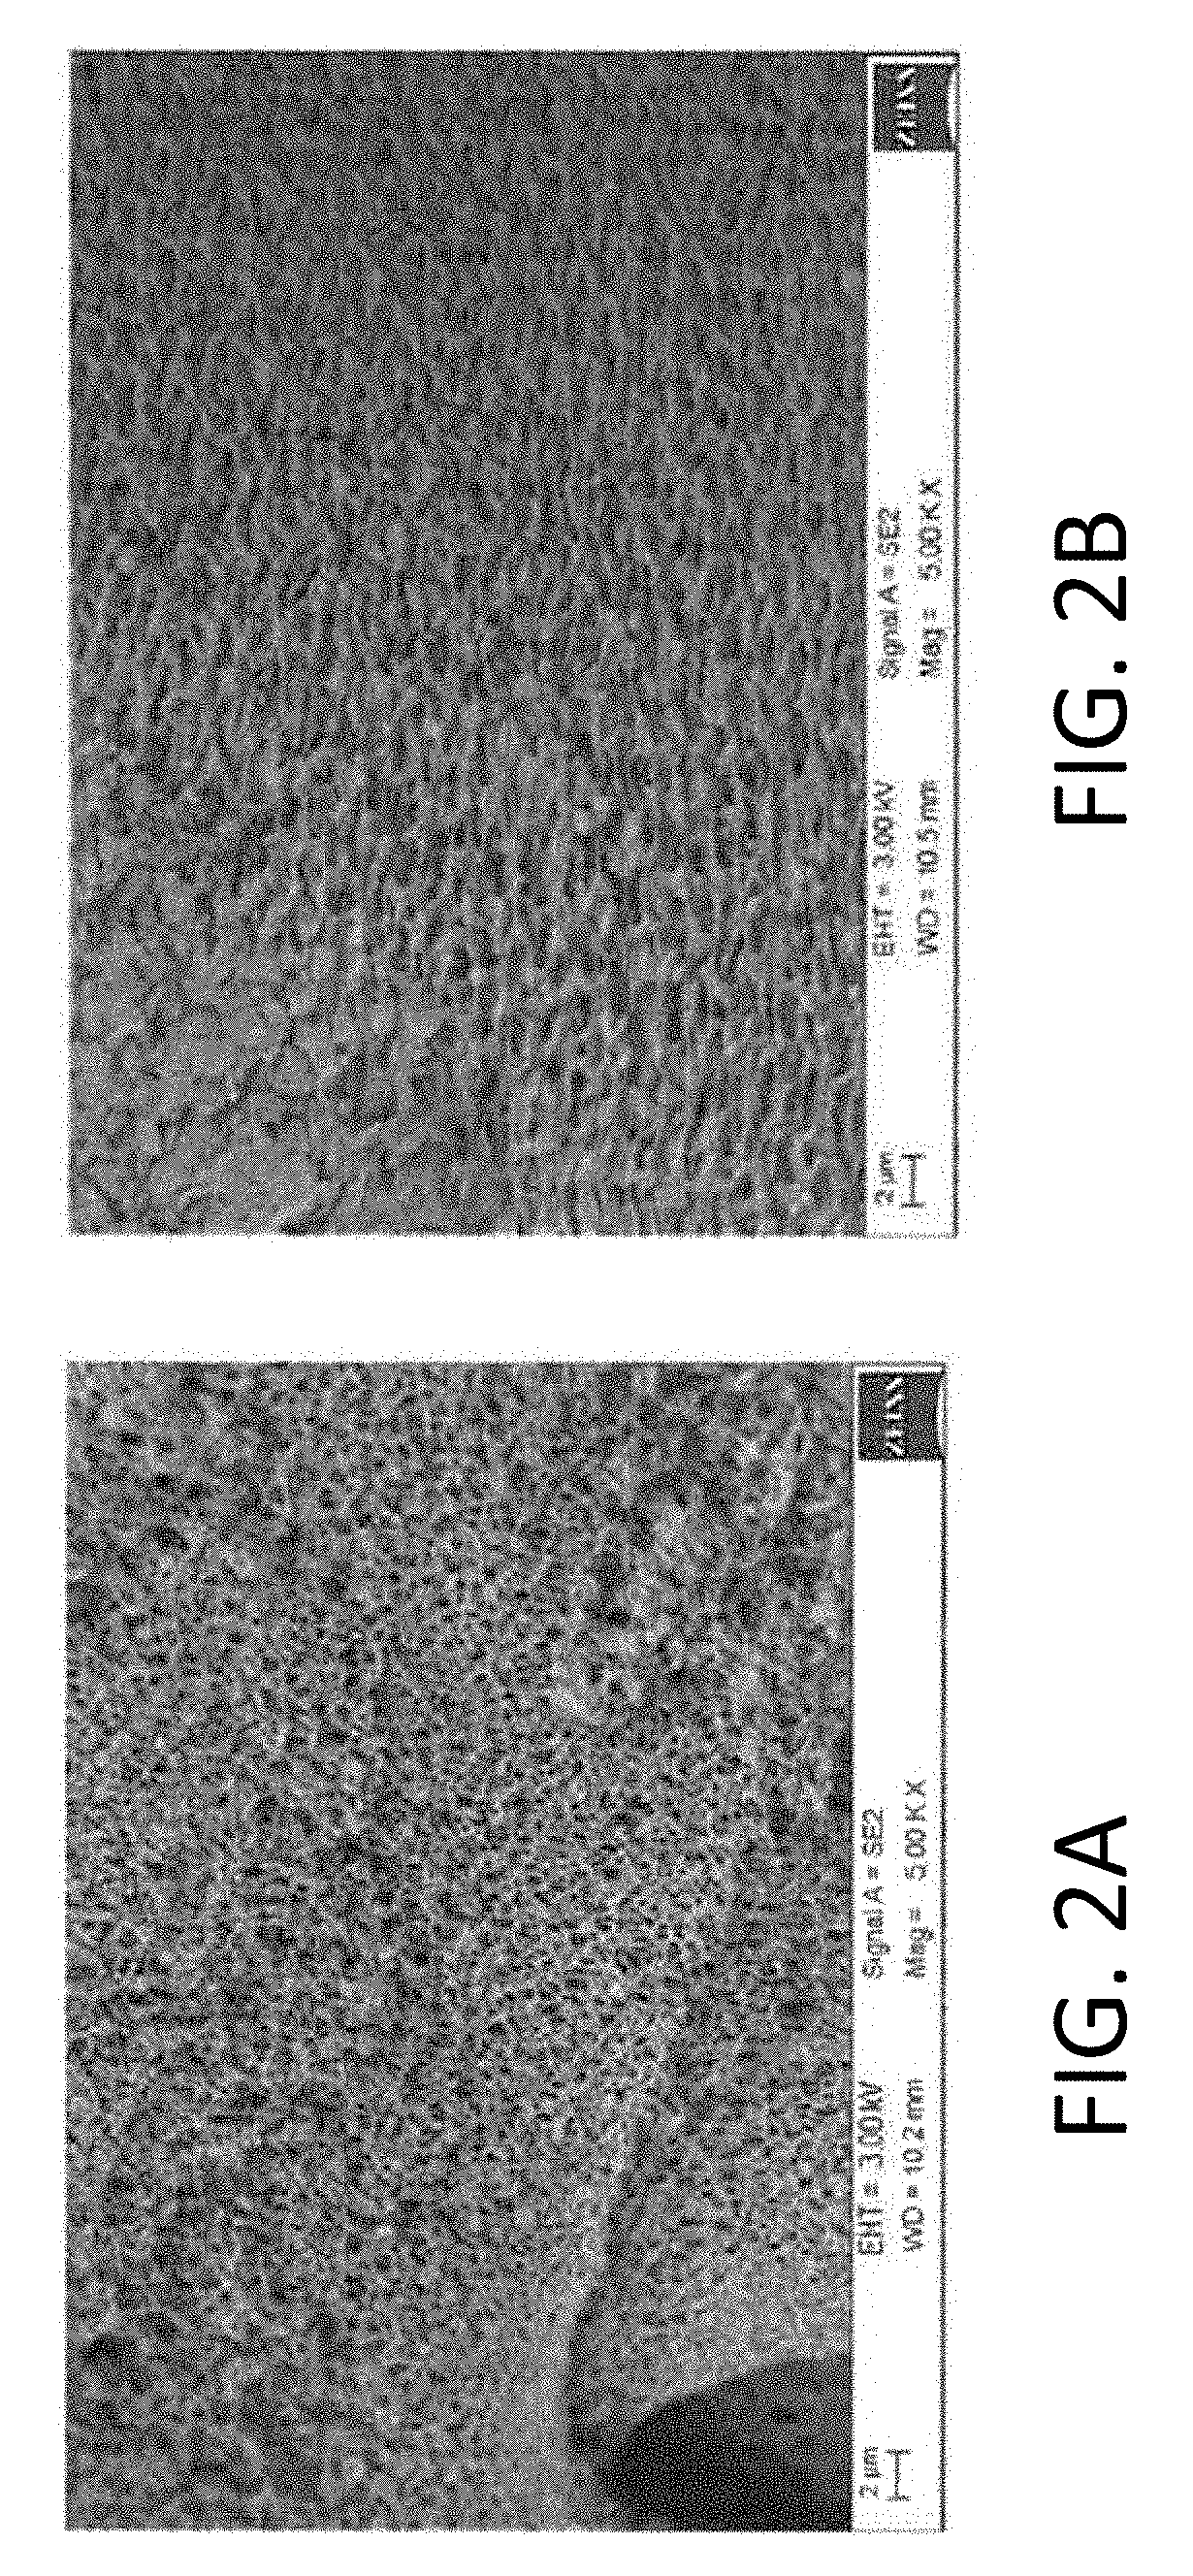 Carbon-based compositions useful for occlusive medical devices and methods of making and using them